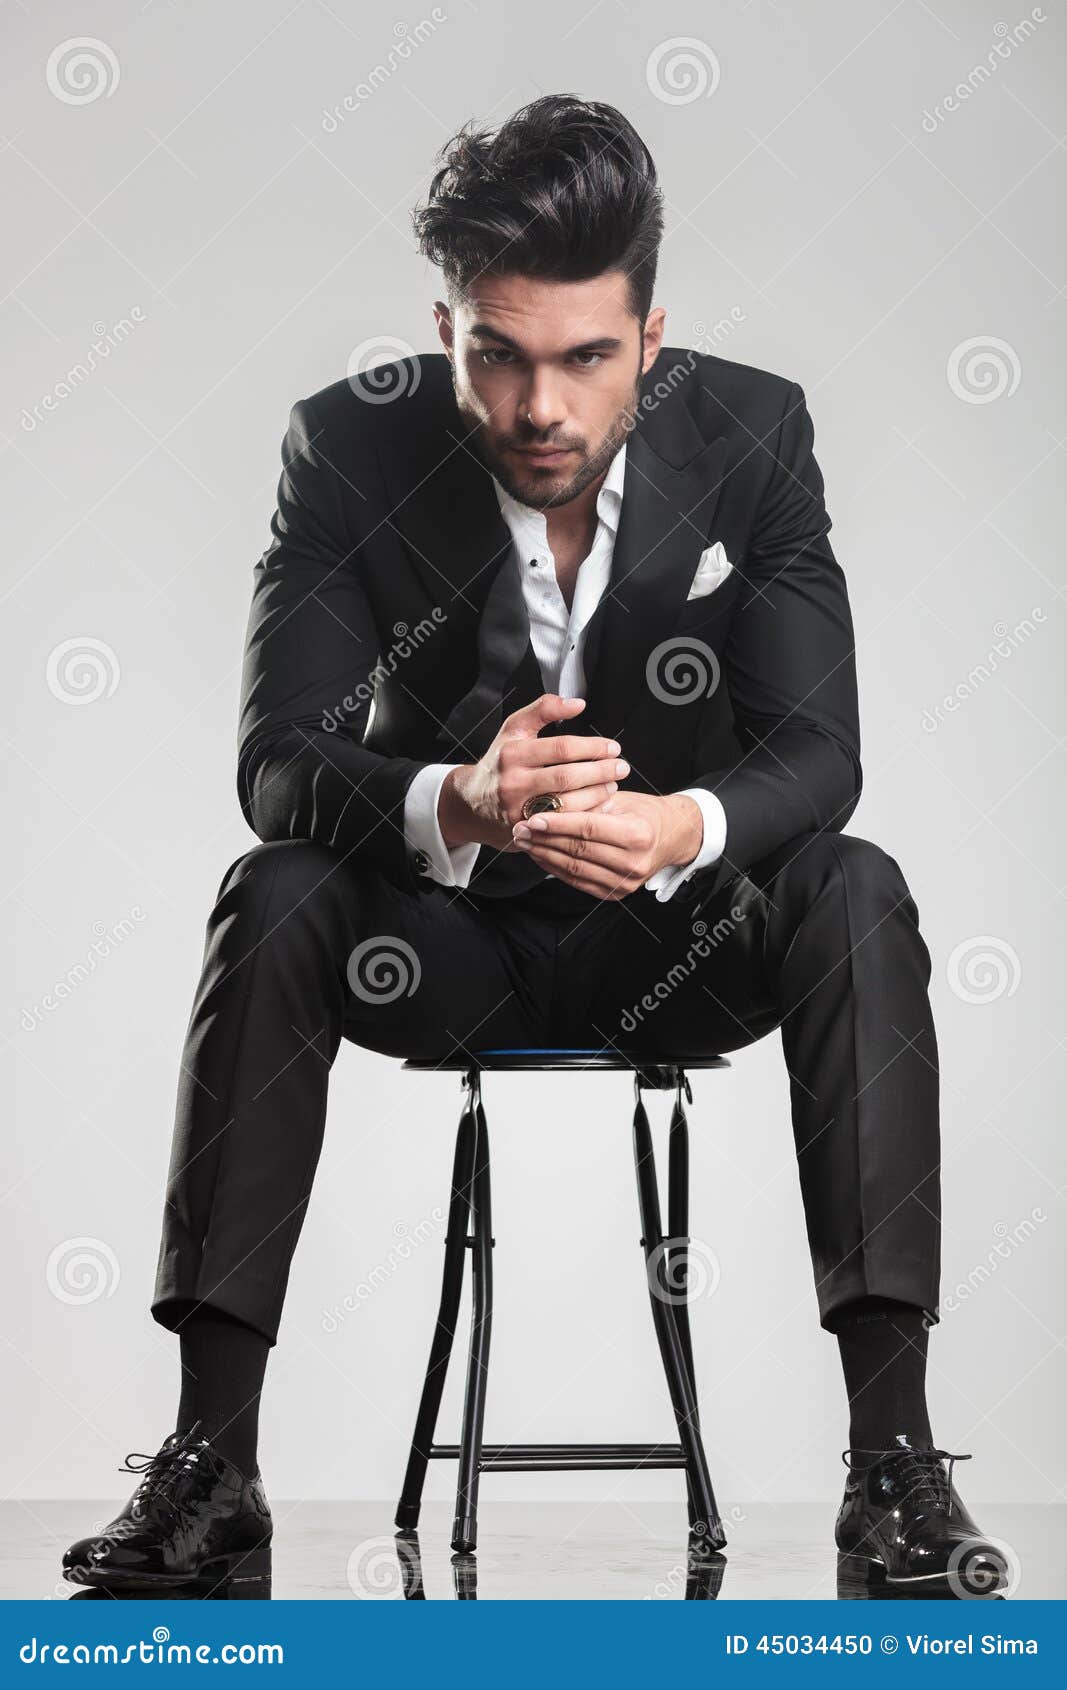 Man In Tuxedo Looking At The Camera Stock Photo - Image ...